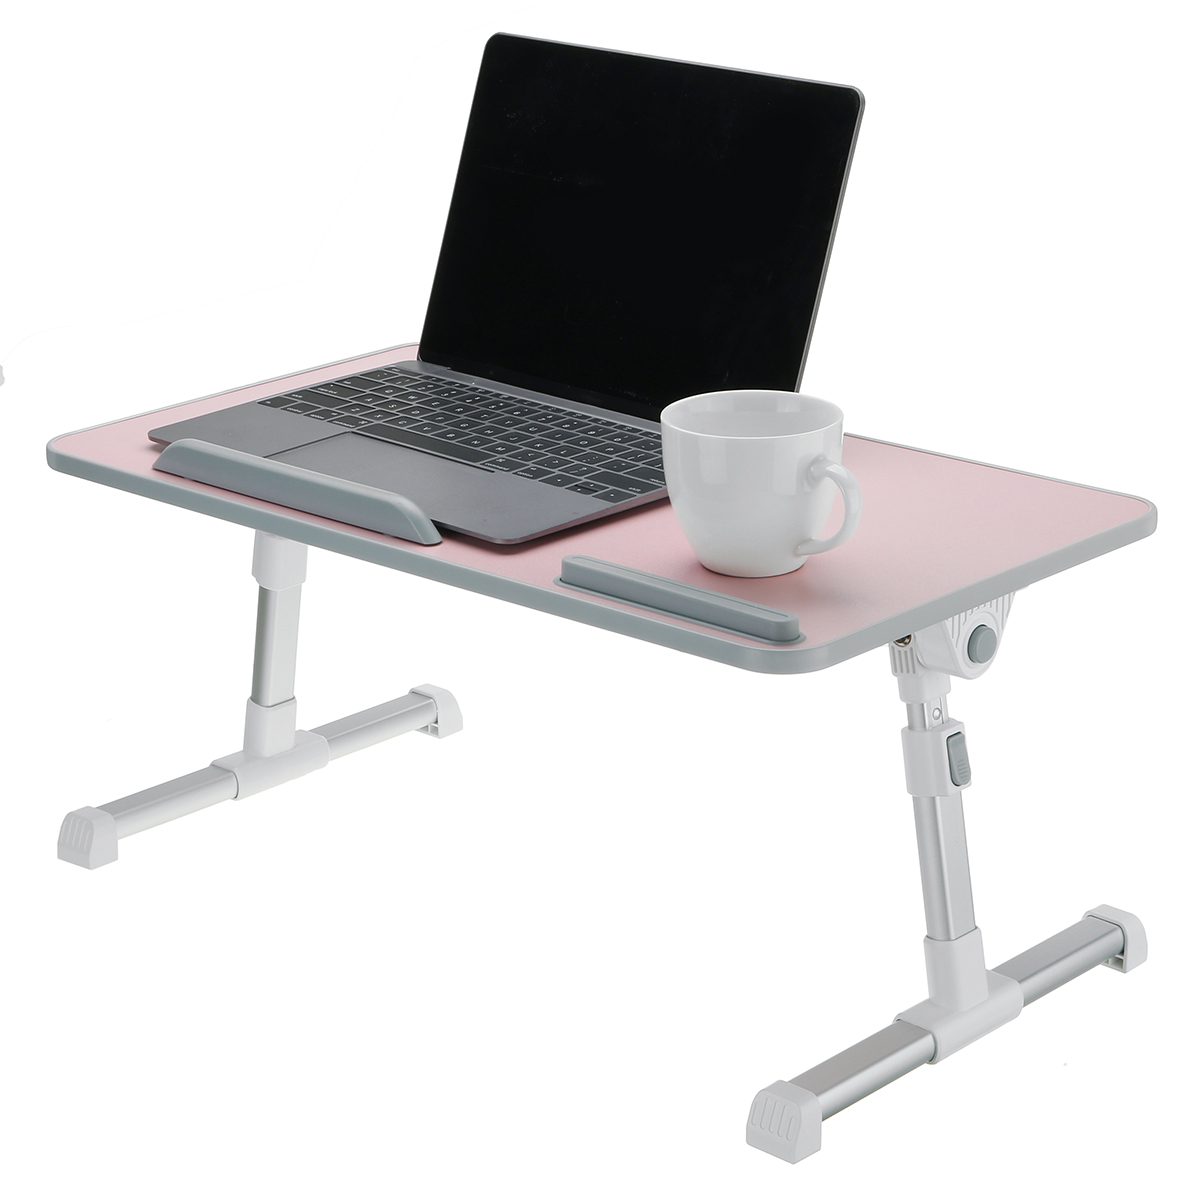 Folding-Laptop-Bed-Table-Dorm-Desk-Couch-Table-with-Cooling-Fan-Breakfast-Tray-Notebook-Stand-Readin-1796247-11